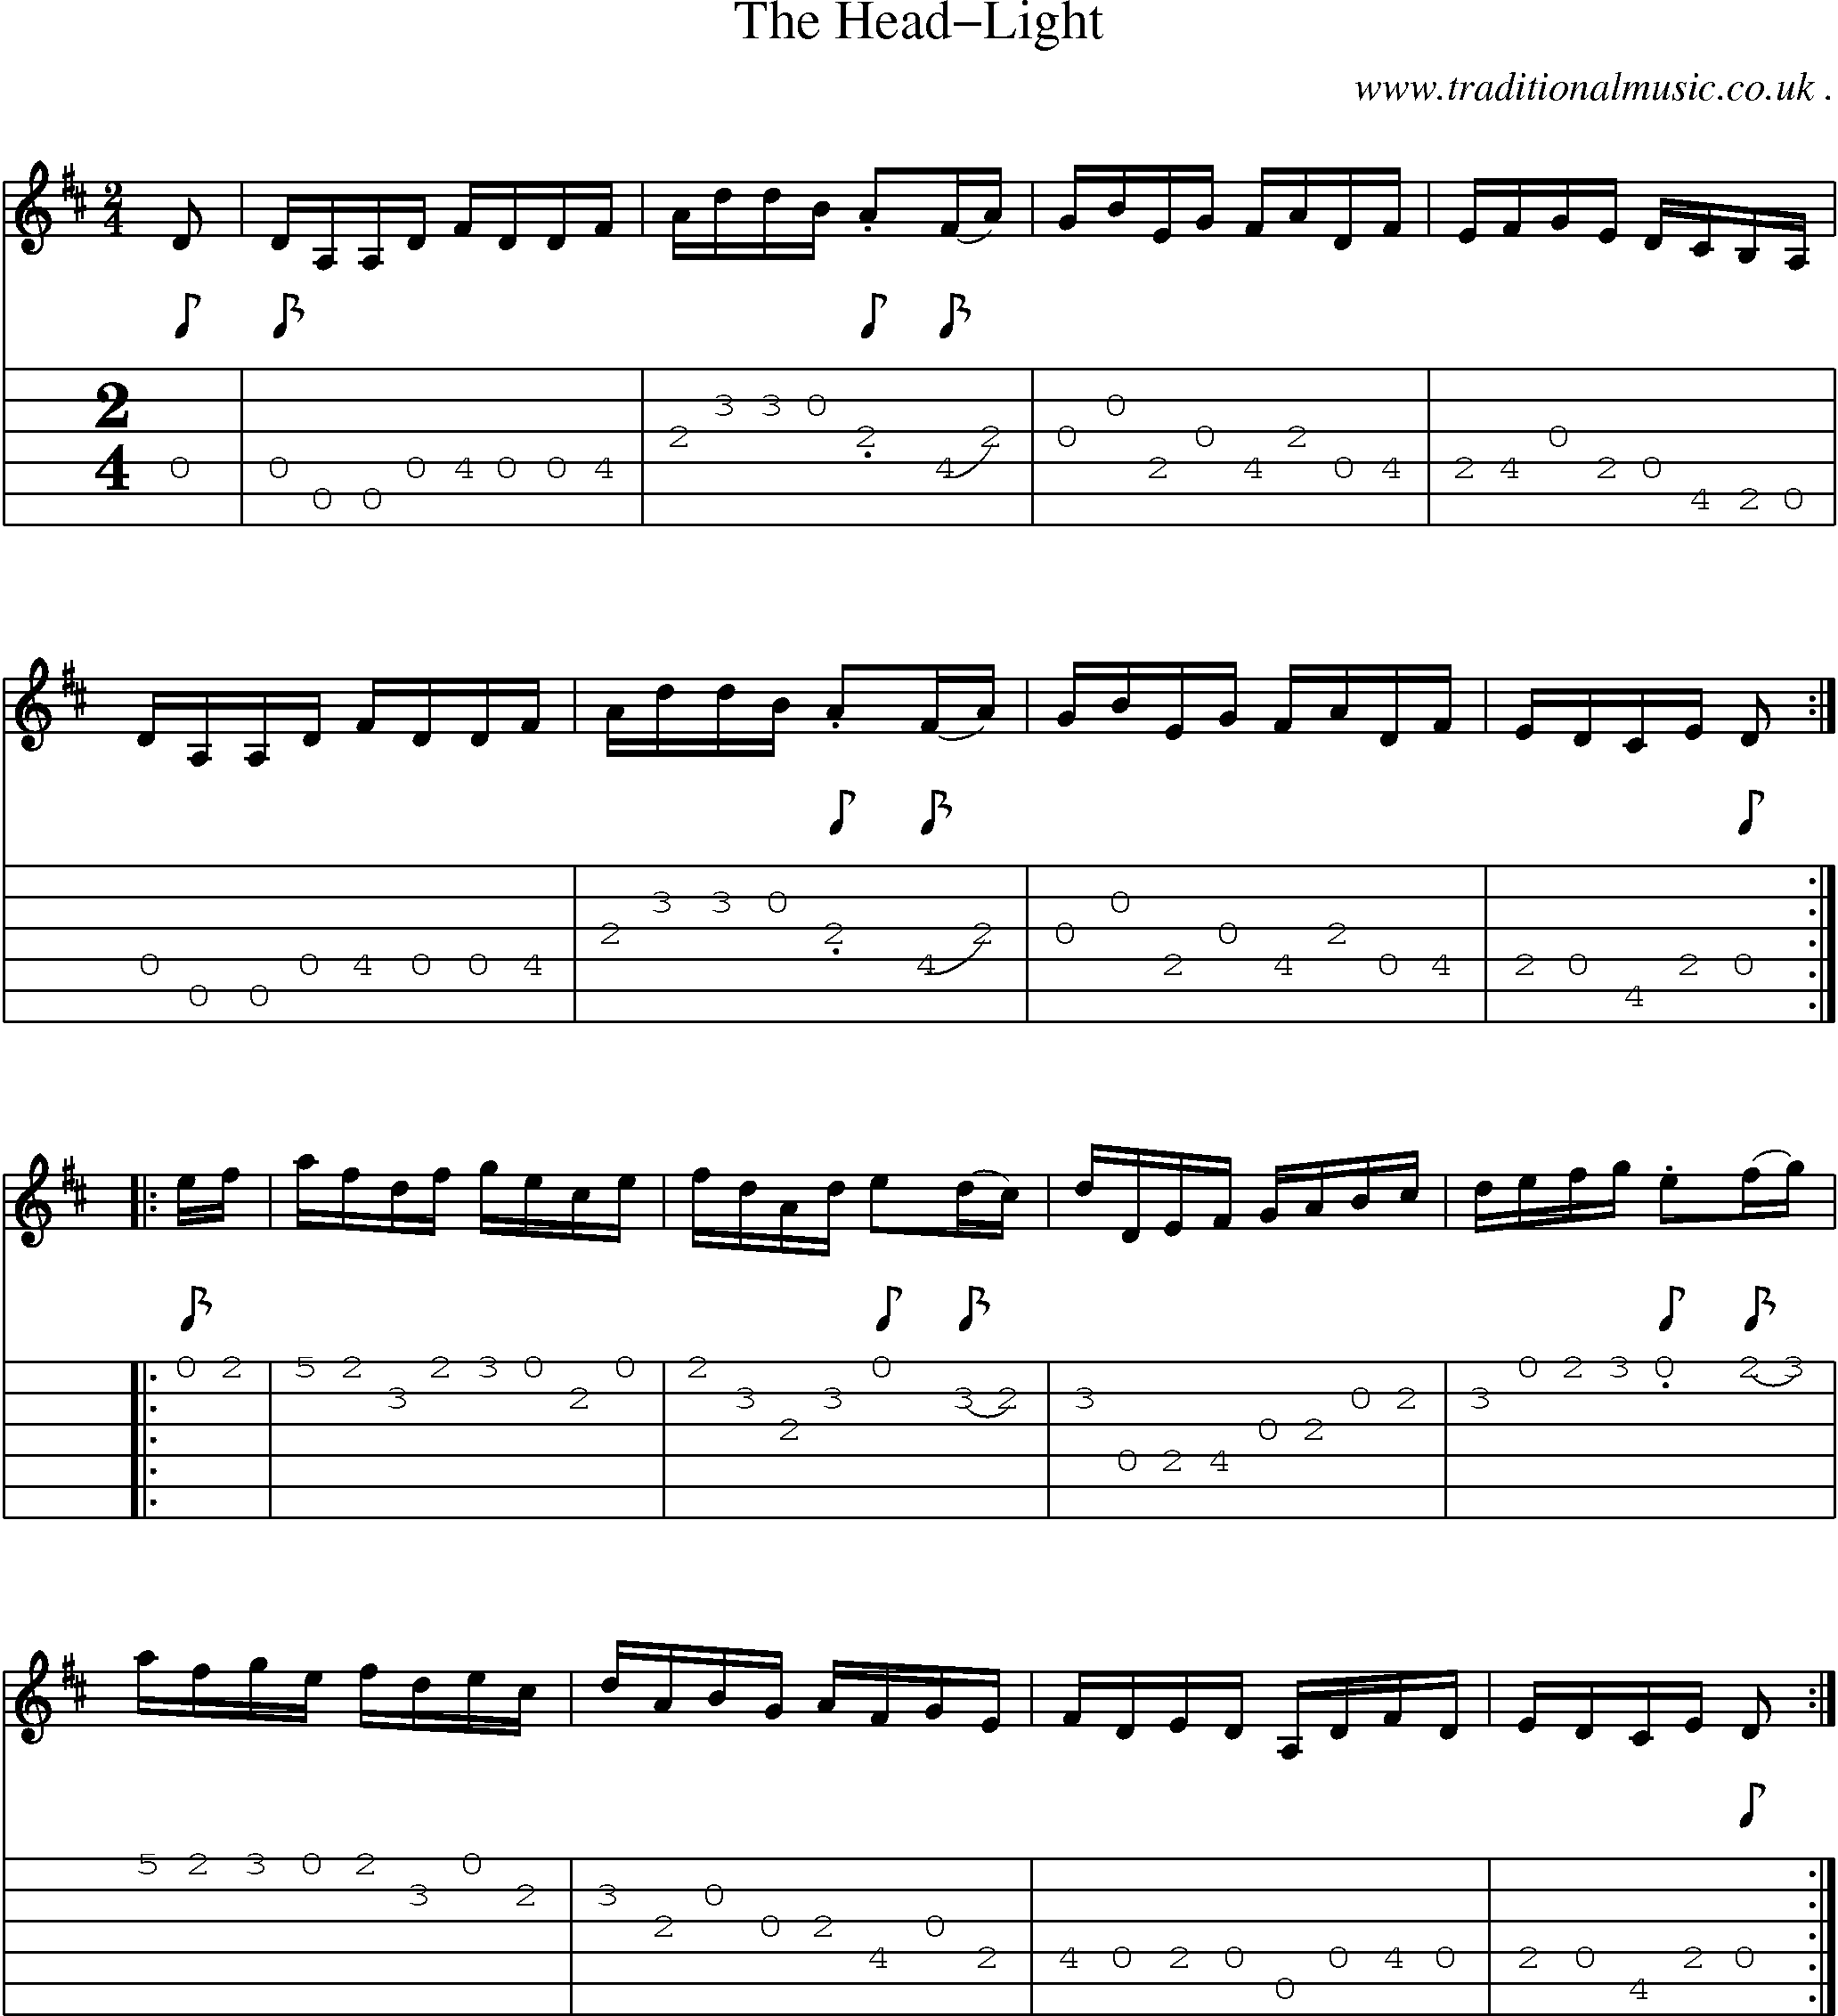 Sheet-Music and Guitar Tabs for The Head-light